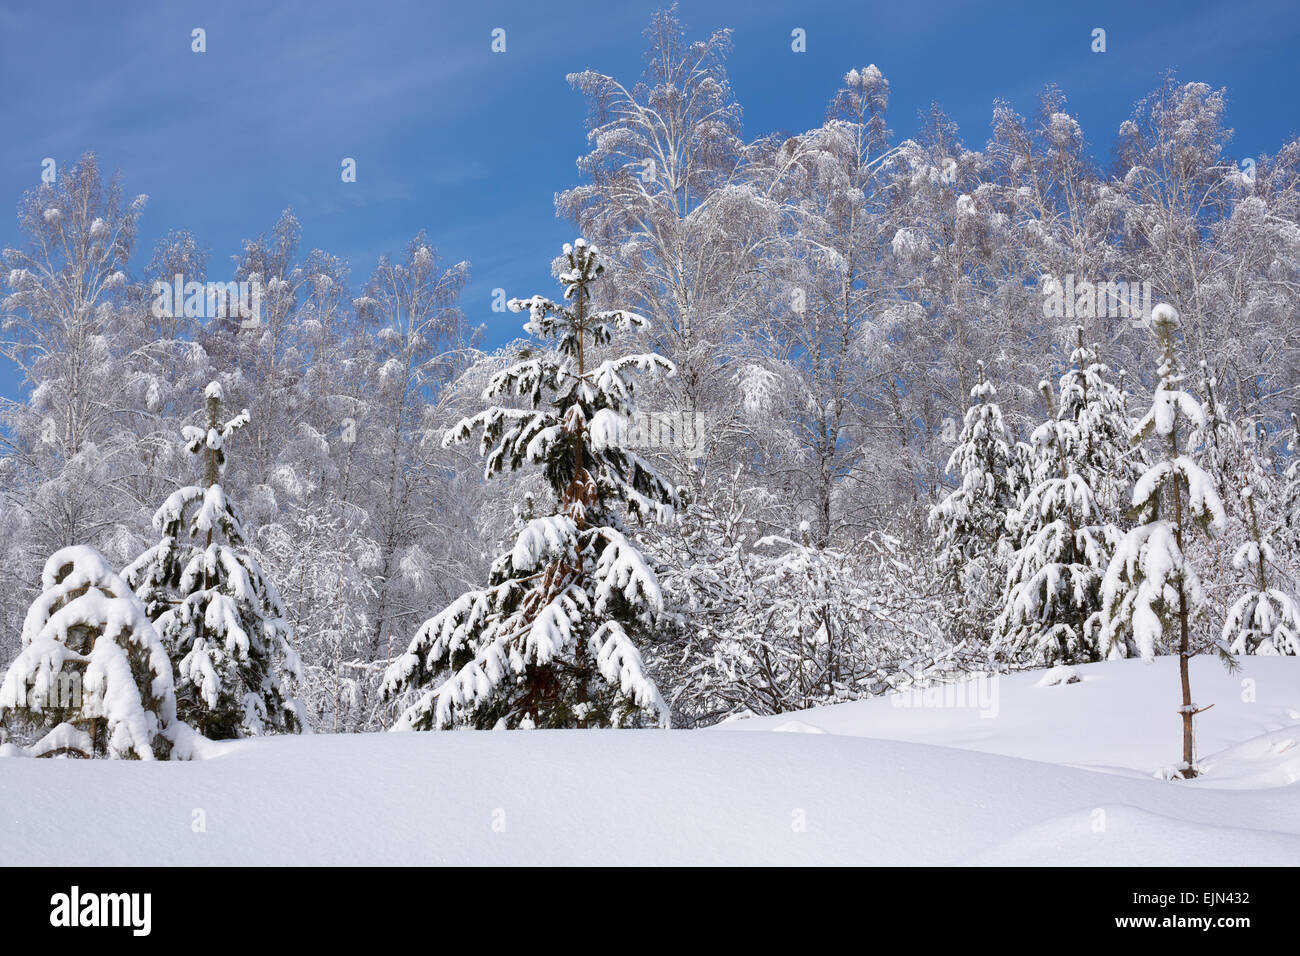 Snowy trees in winter forest Banque D'Images